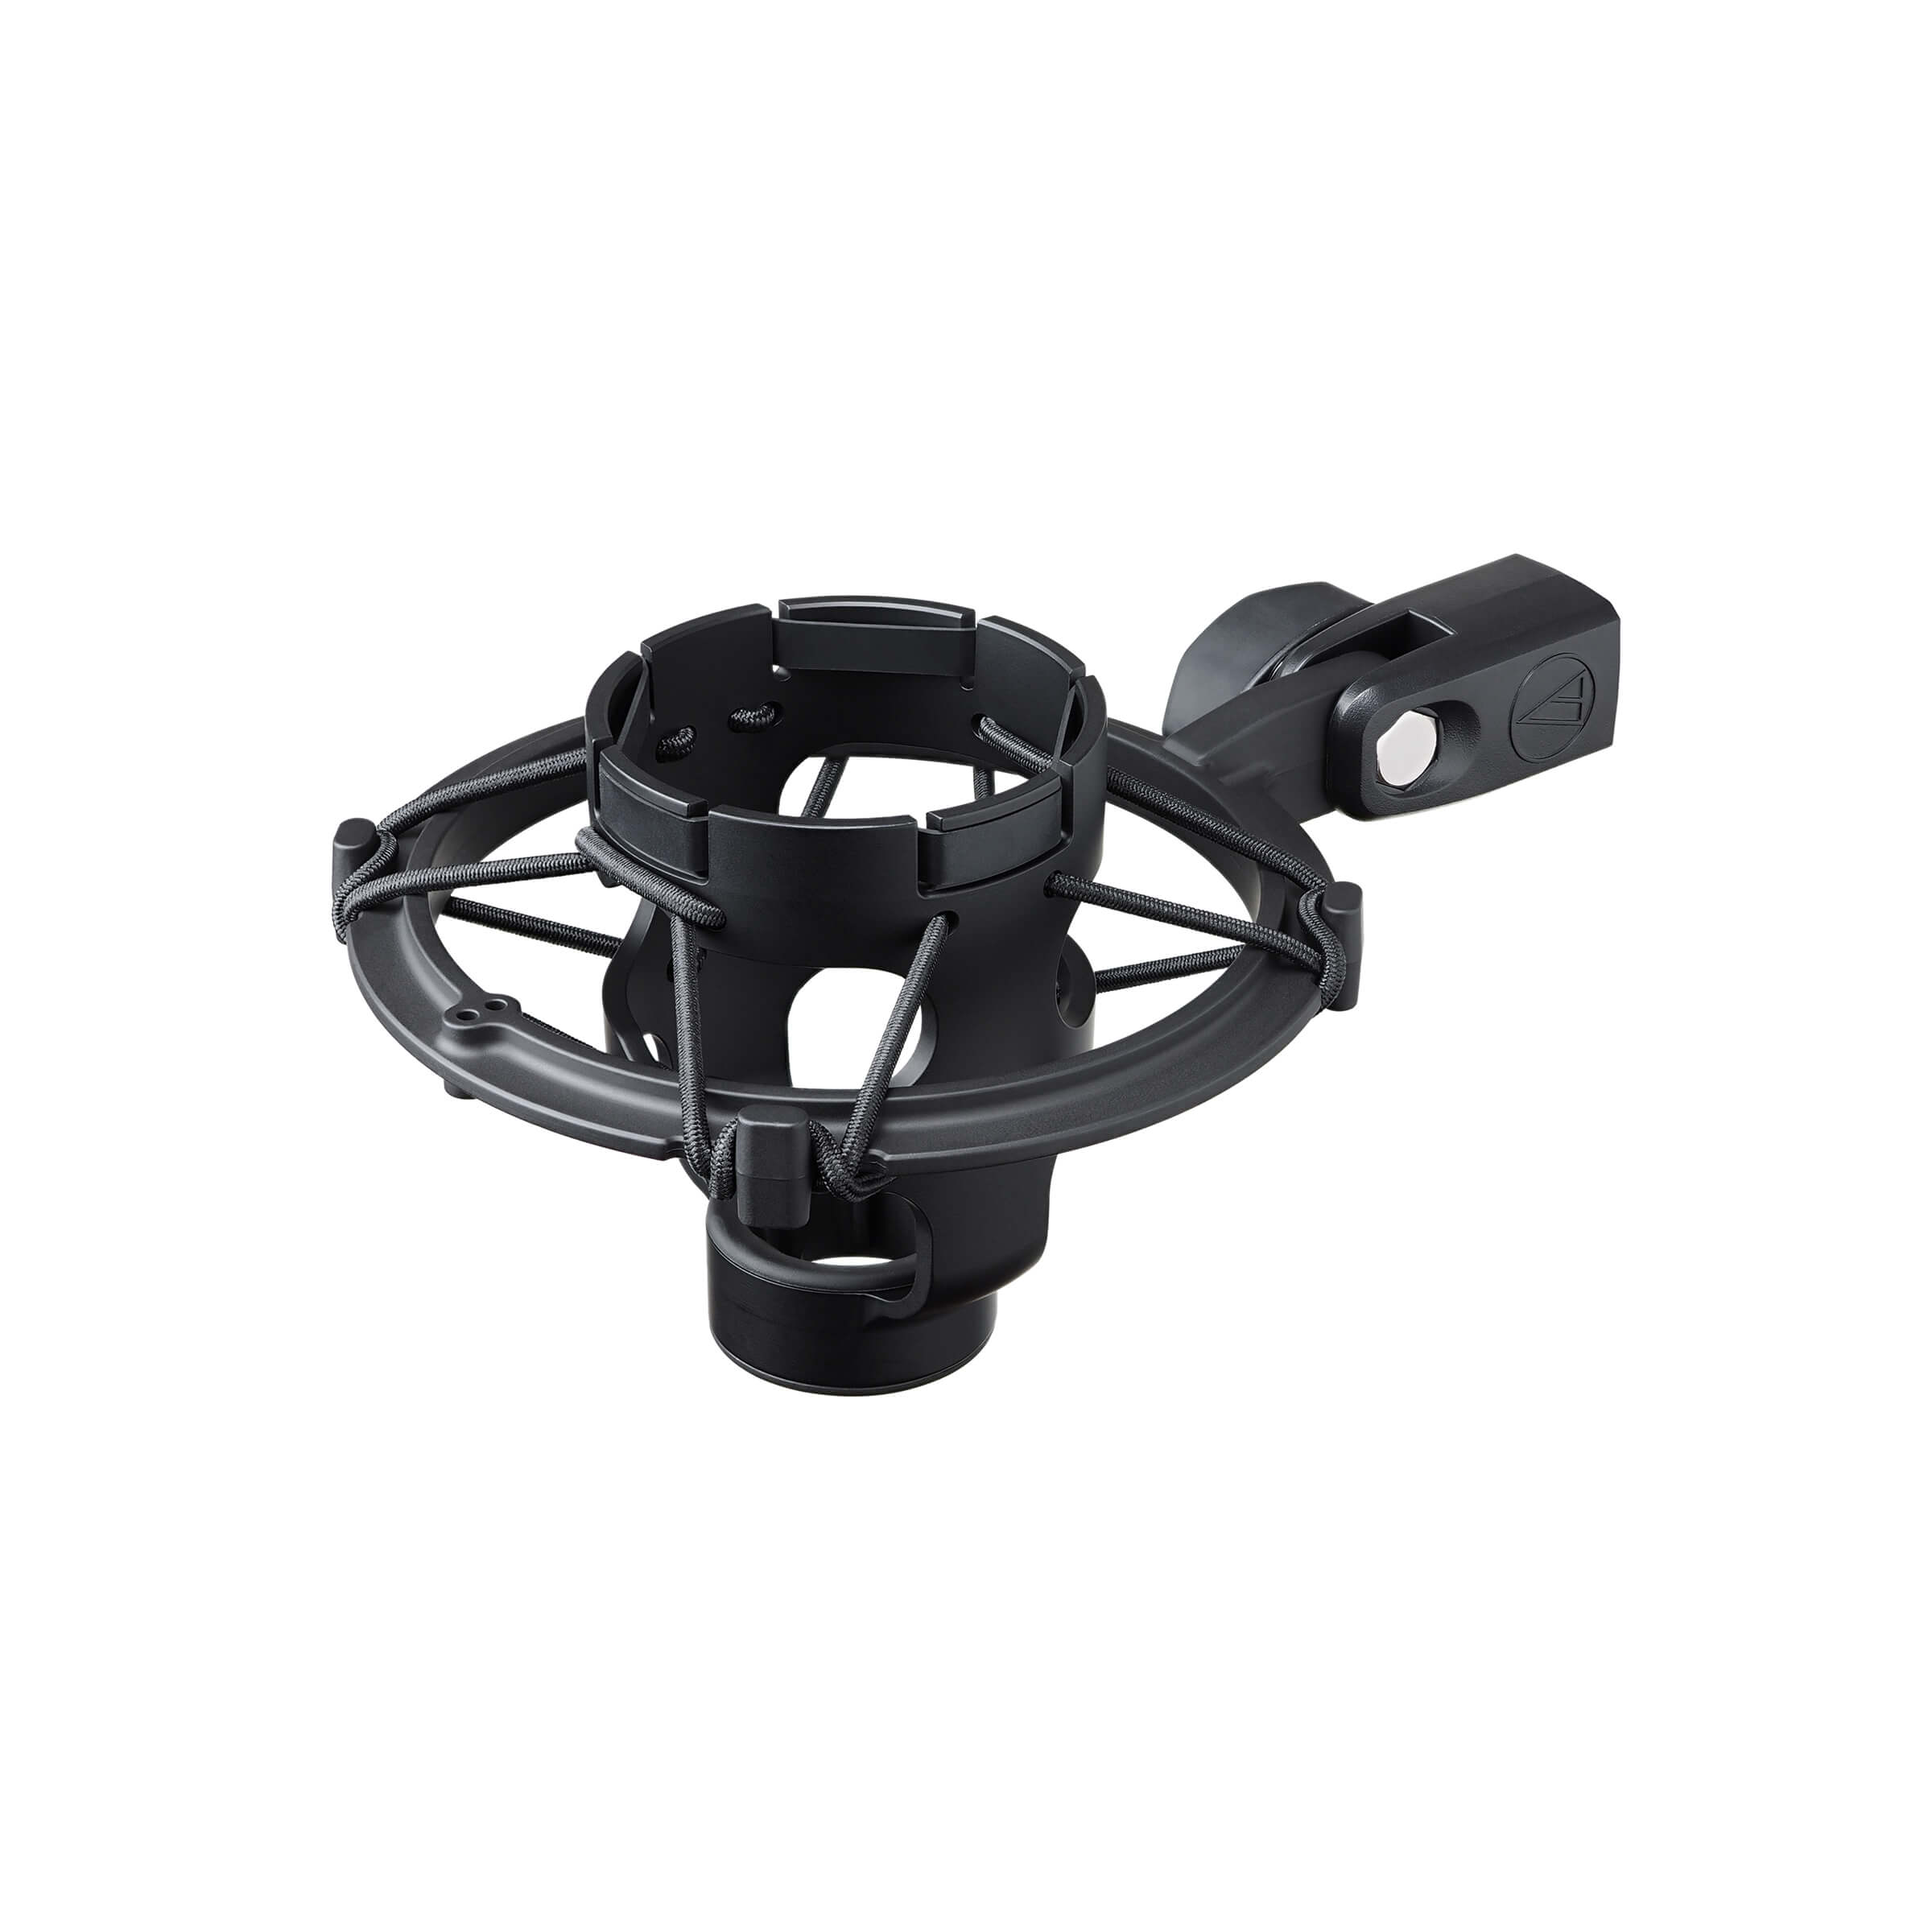 Audio-Technica Announces New Shock Mounts for Select 40 Series Microphones